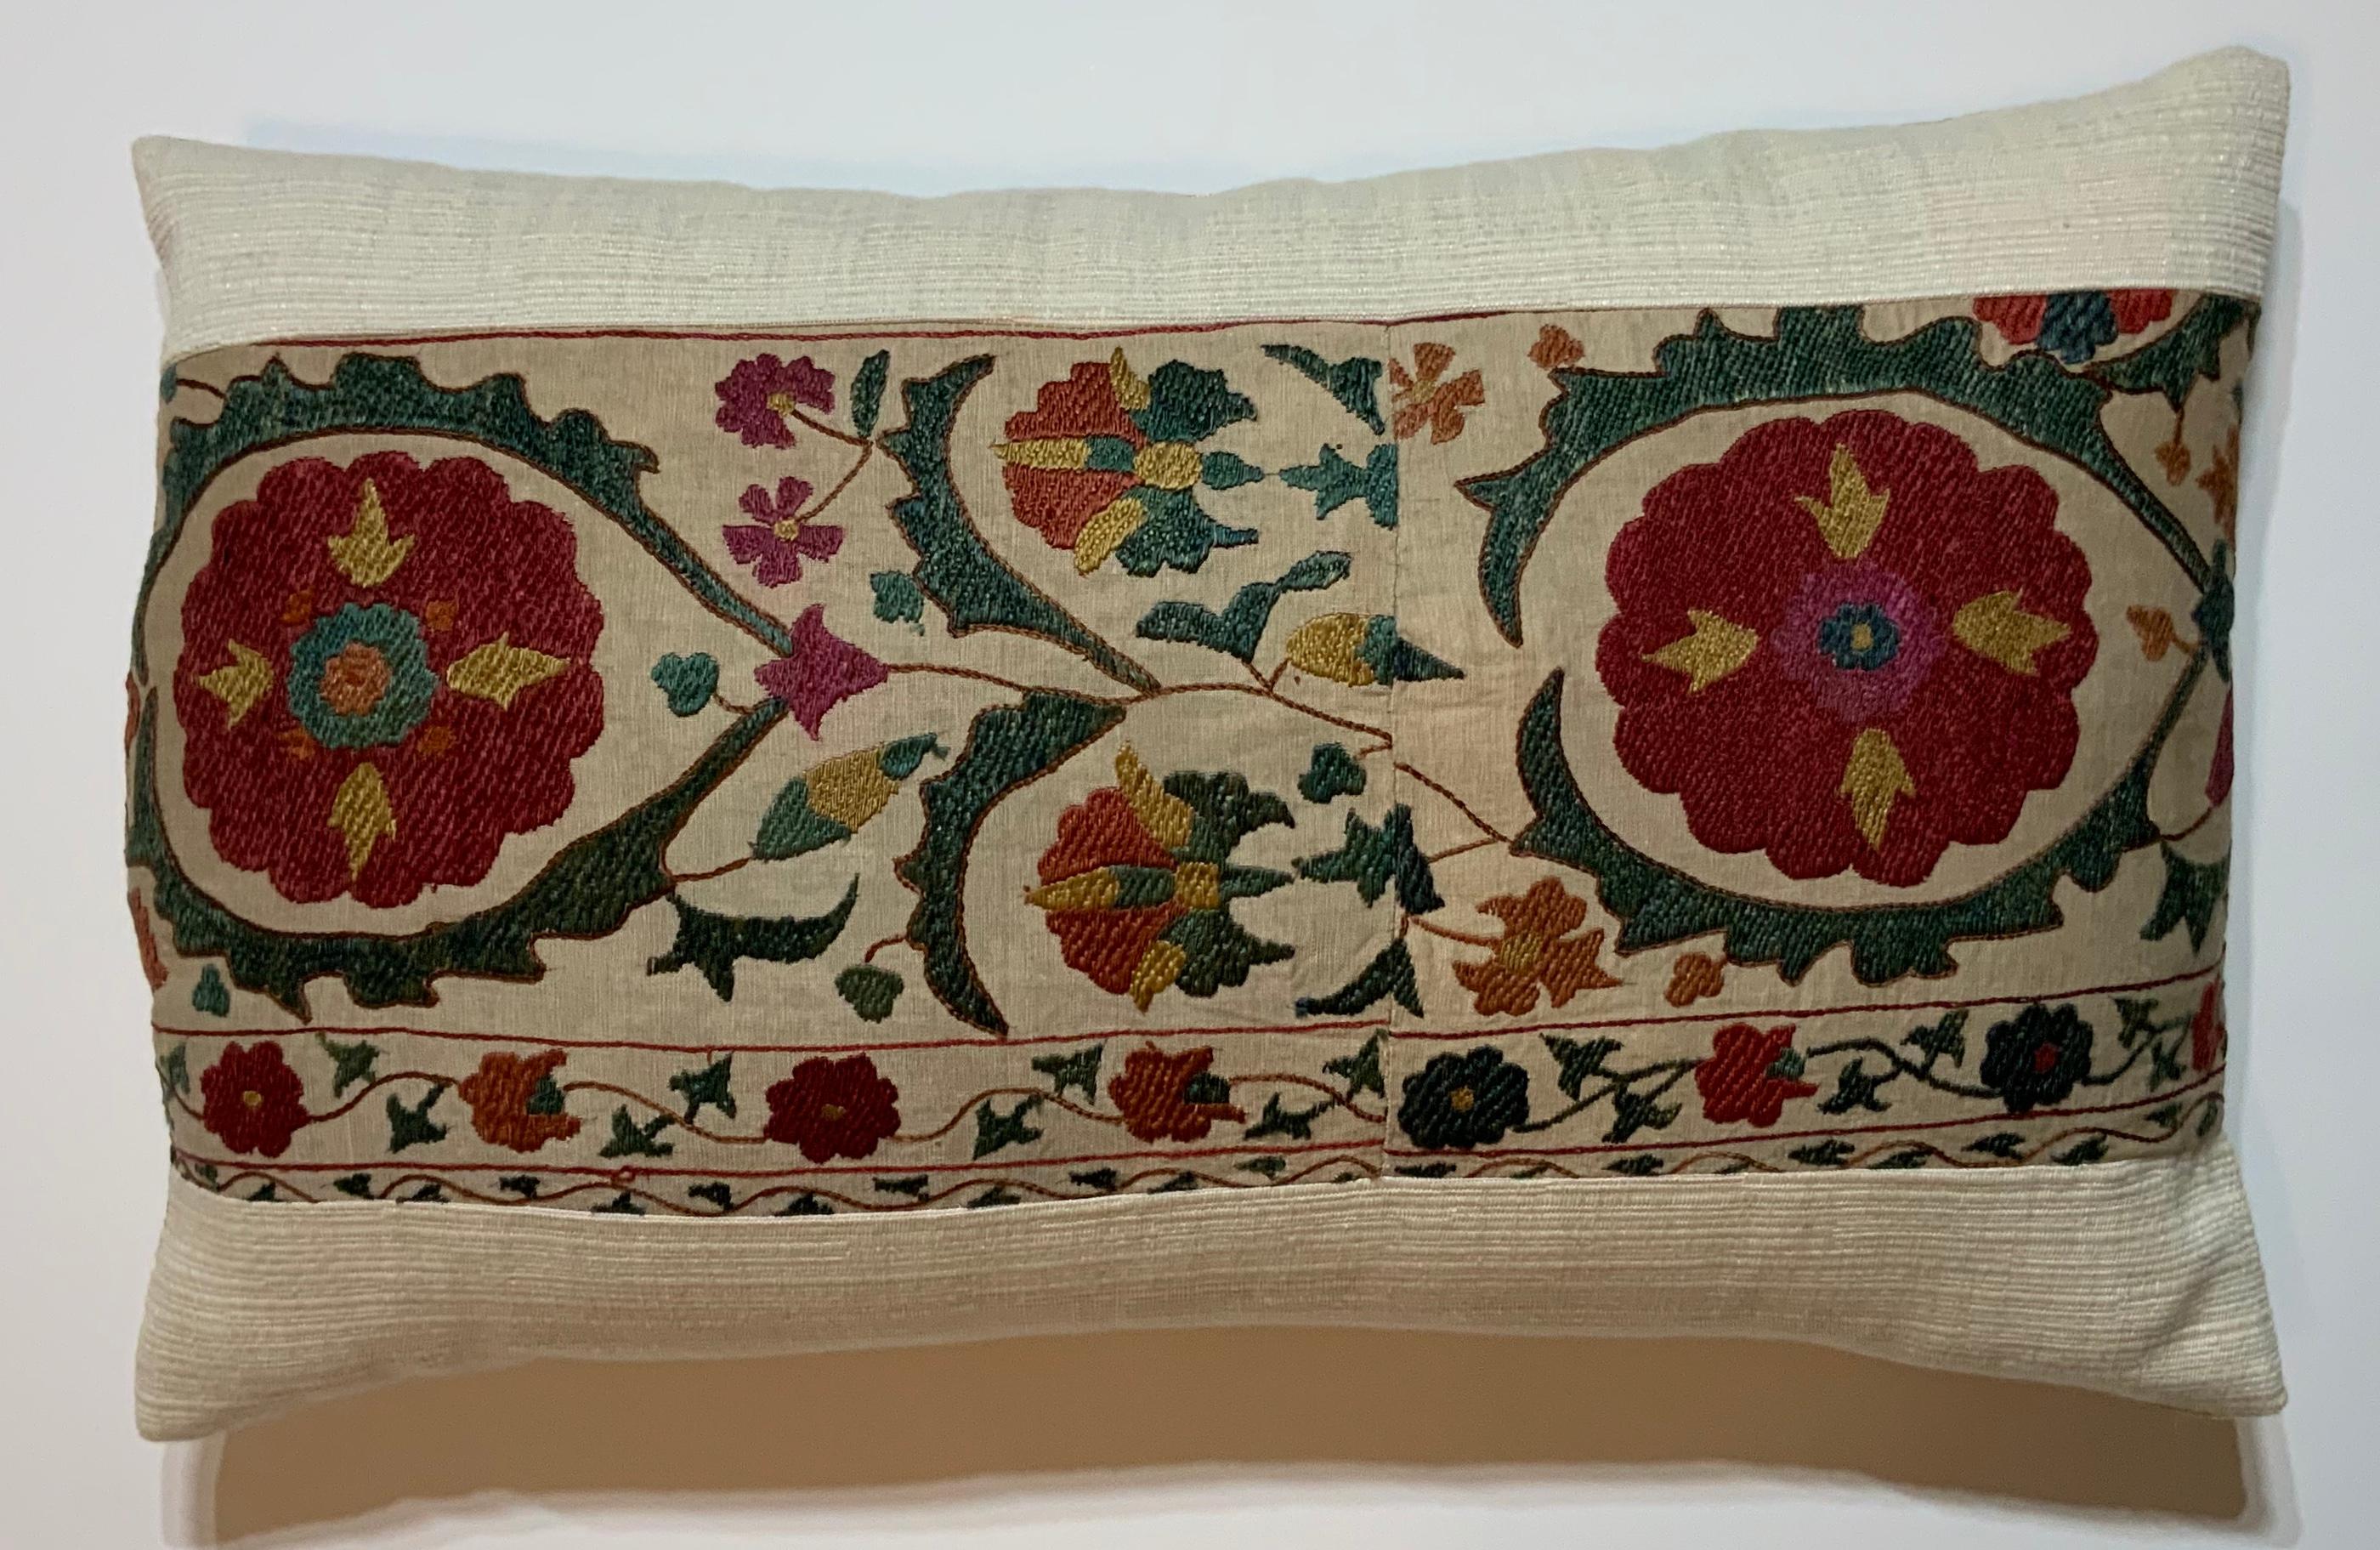 Beautiful pillow made of hand embroidery silk, on cream color background, exceptional flowers and vine motifs all around, linen backing, fresh new insert.